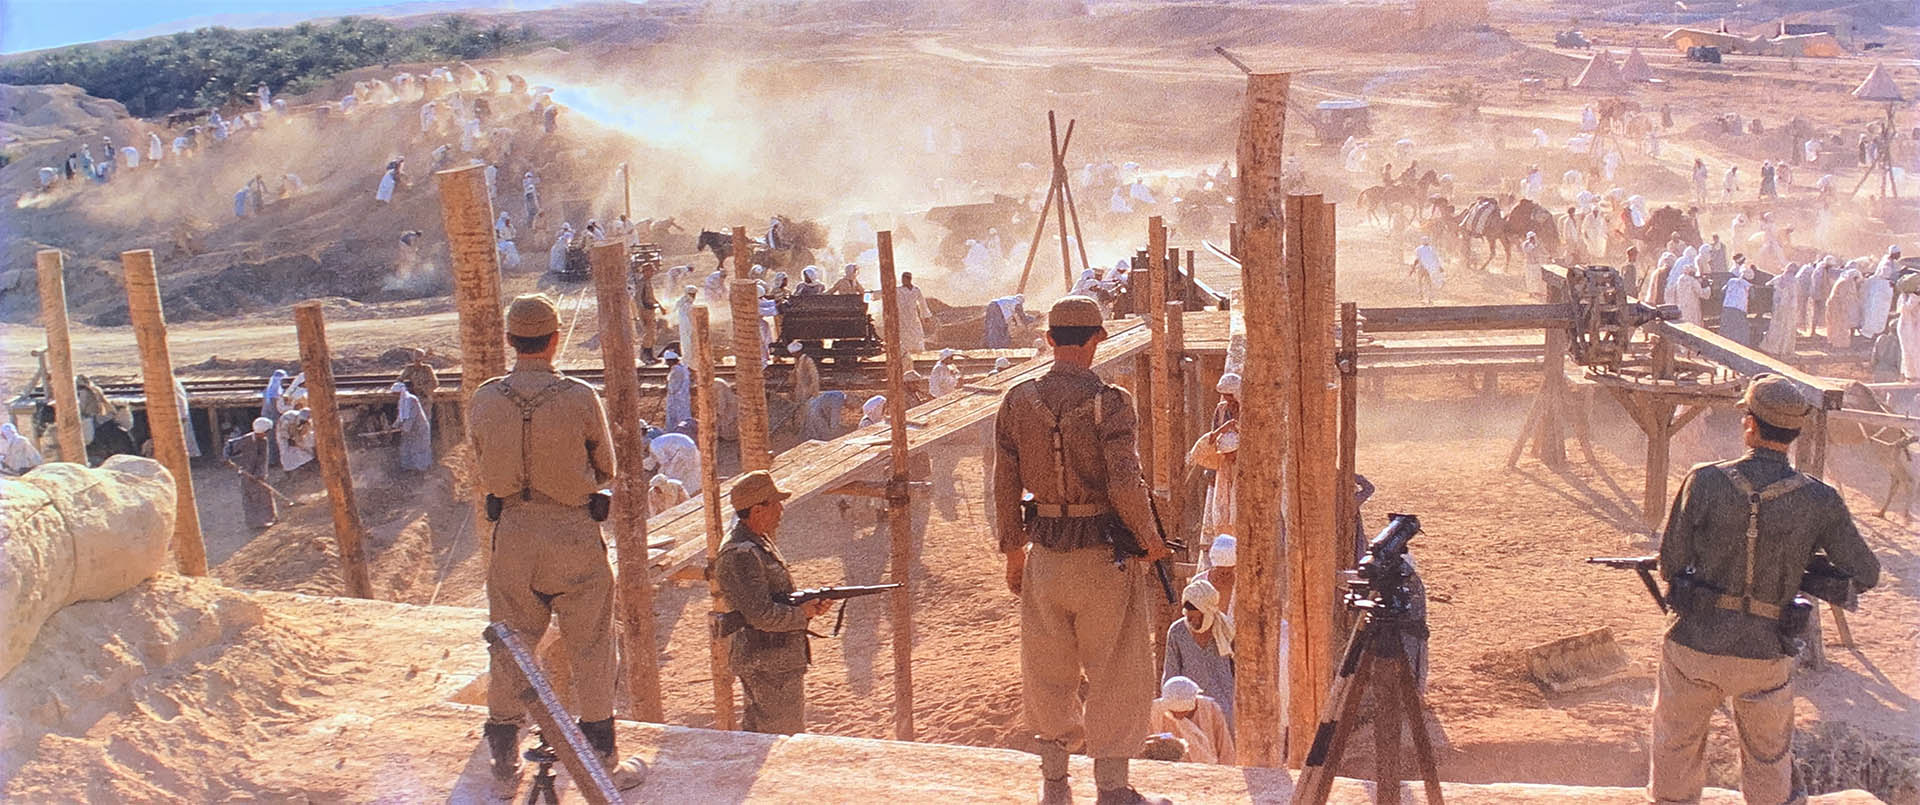 indiana jones and the raiders of the lost ark 4k blu-ray still 1